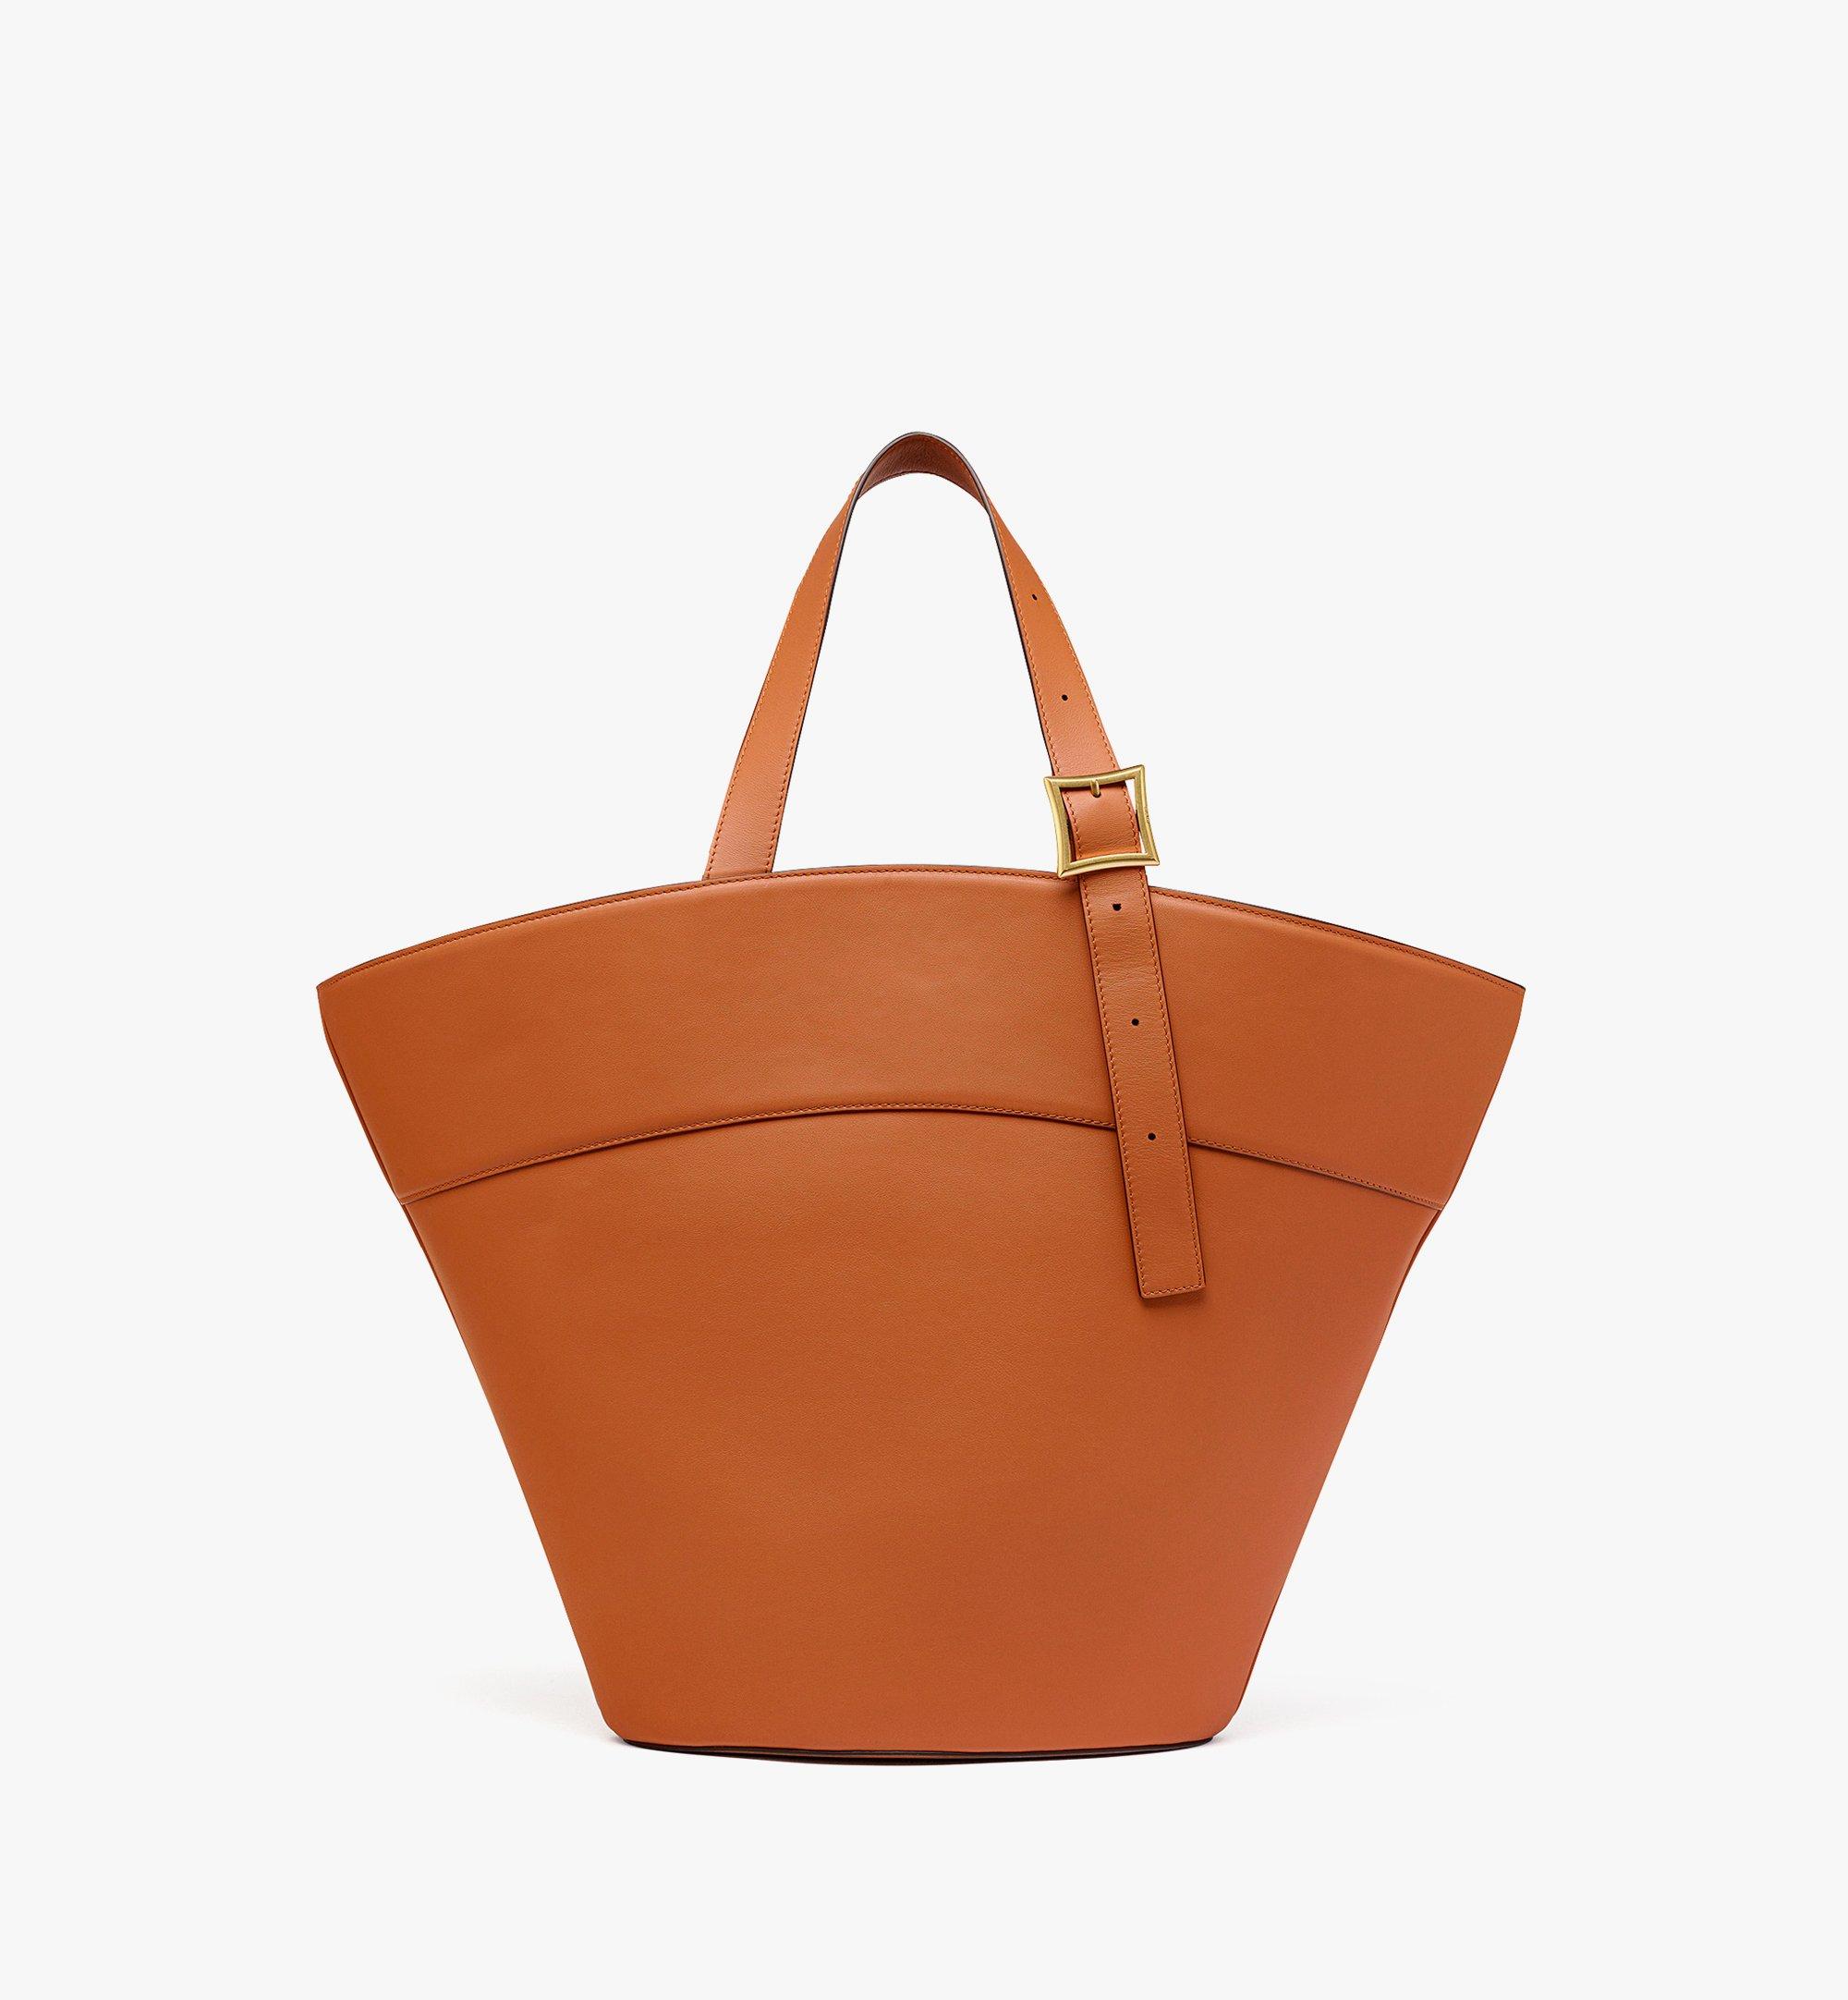 Large Himmel Tote in Spanish Nappa Leather Cognac | MCM ®US